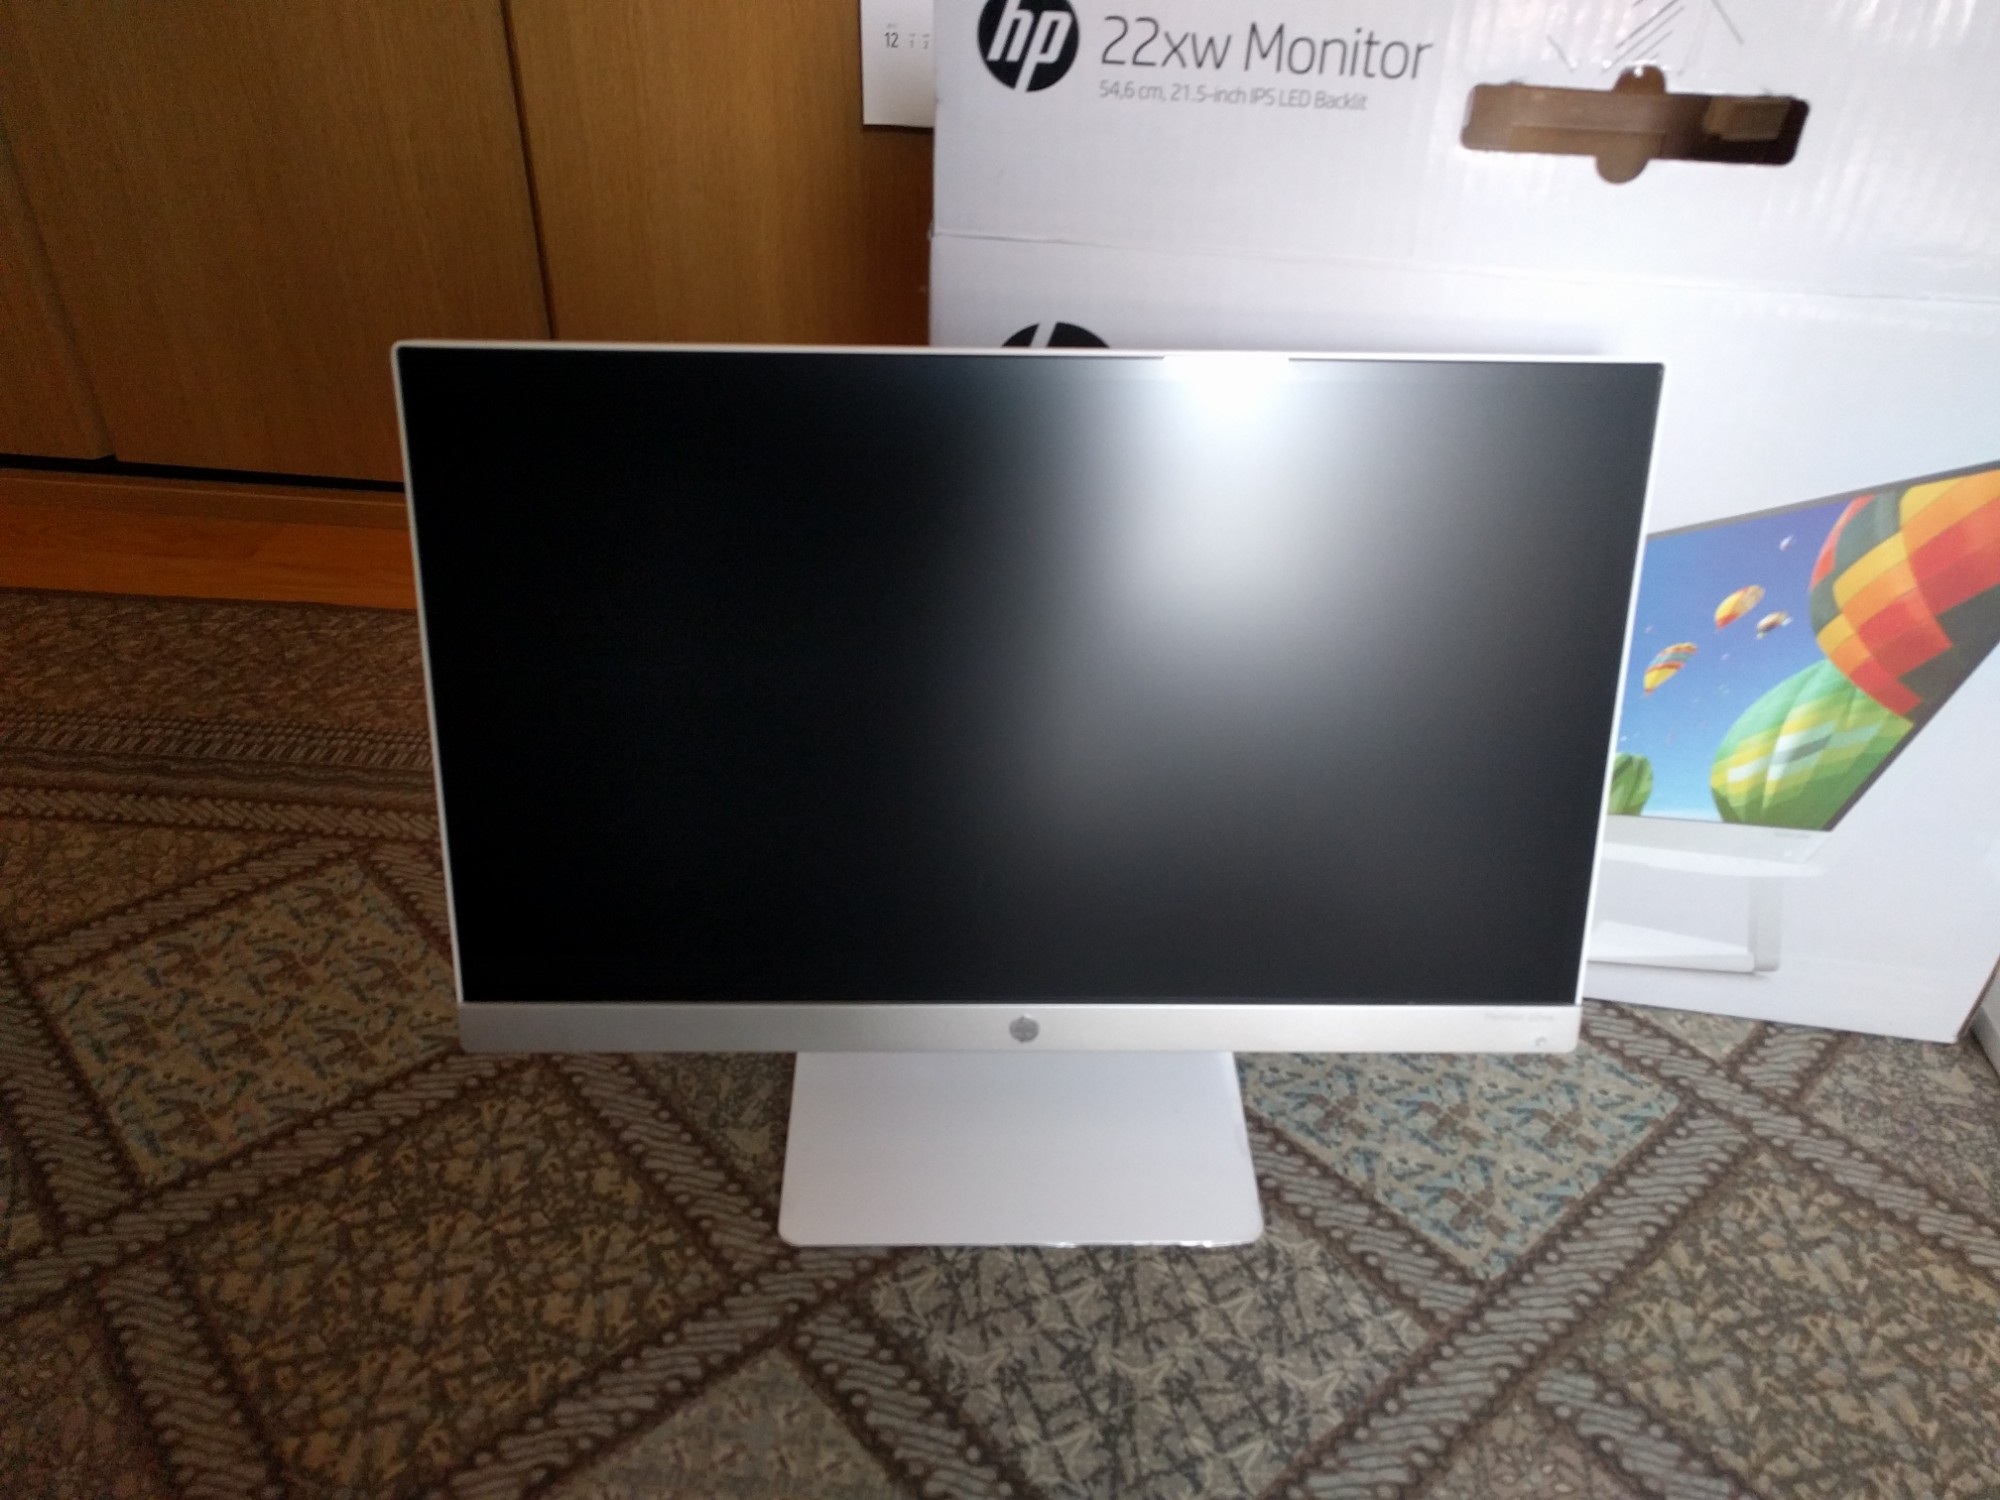 HP Pavilion 22xwを購入。 – OopsOkinTP